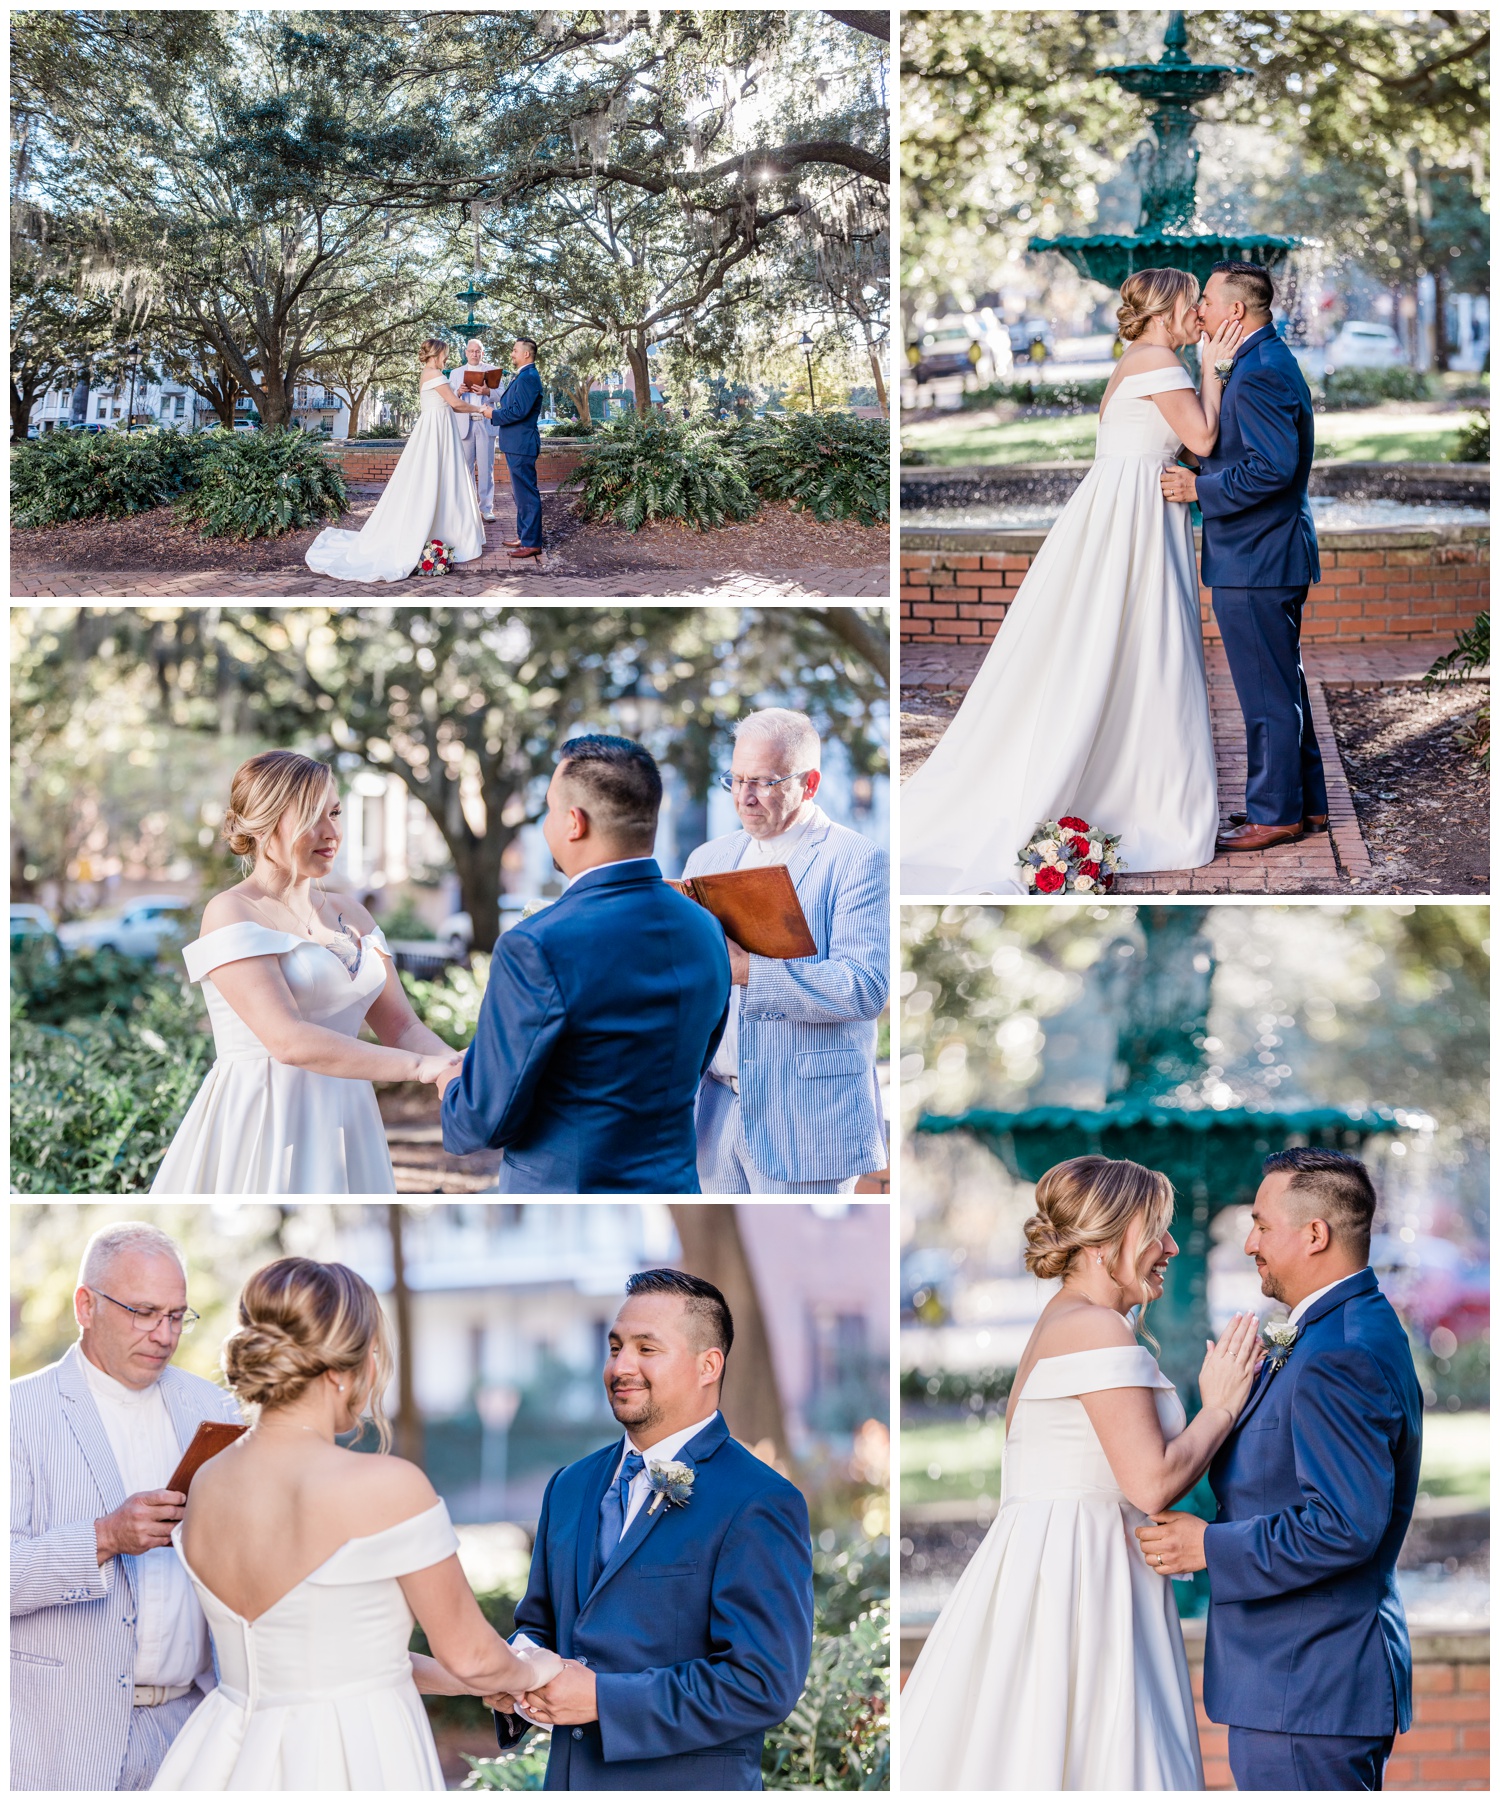 Elopement at Lafayette Square - apt b photography